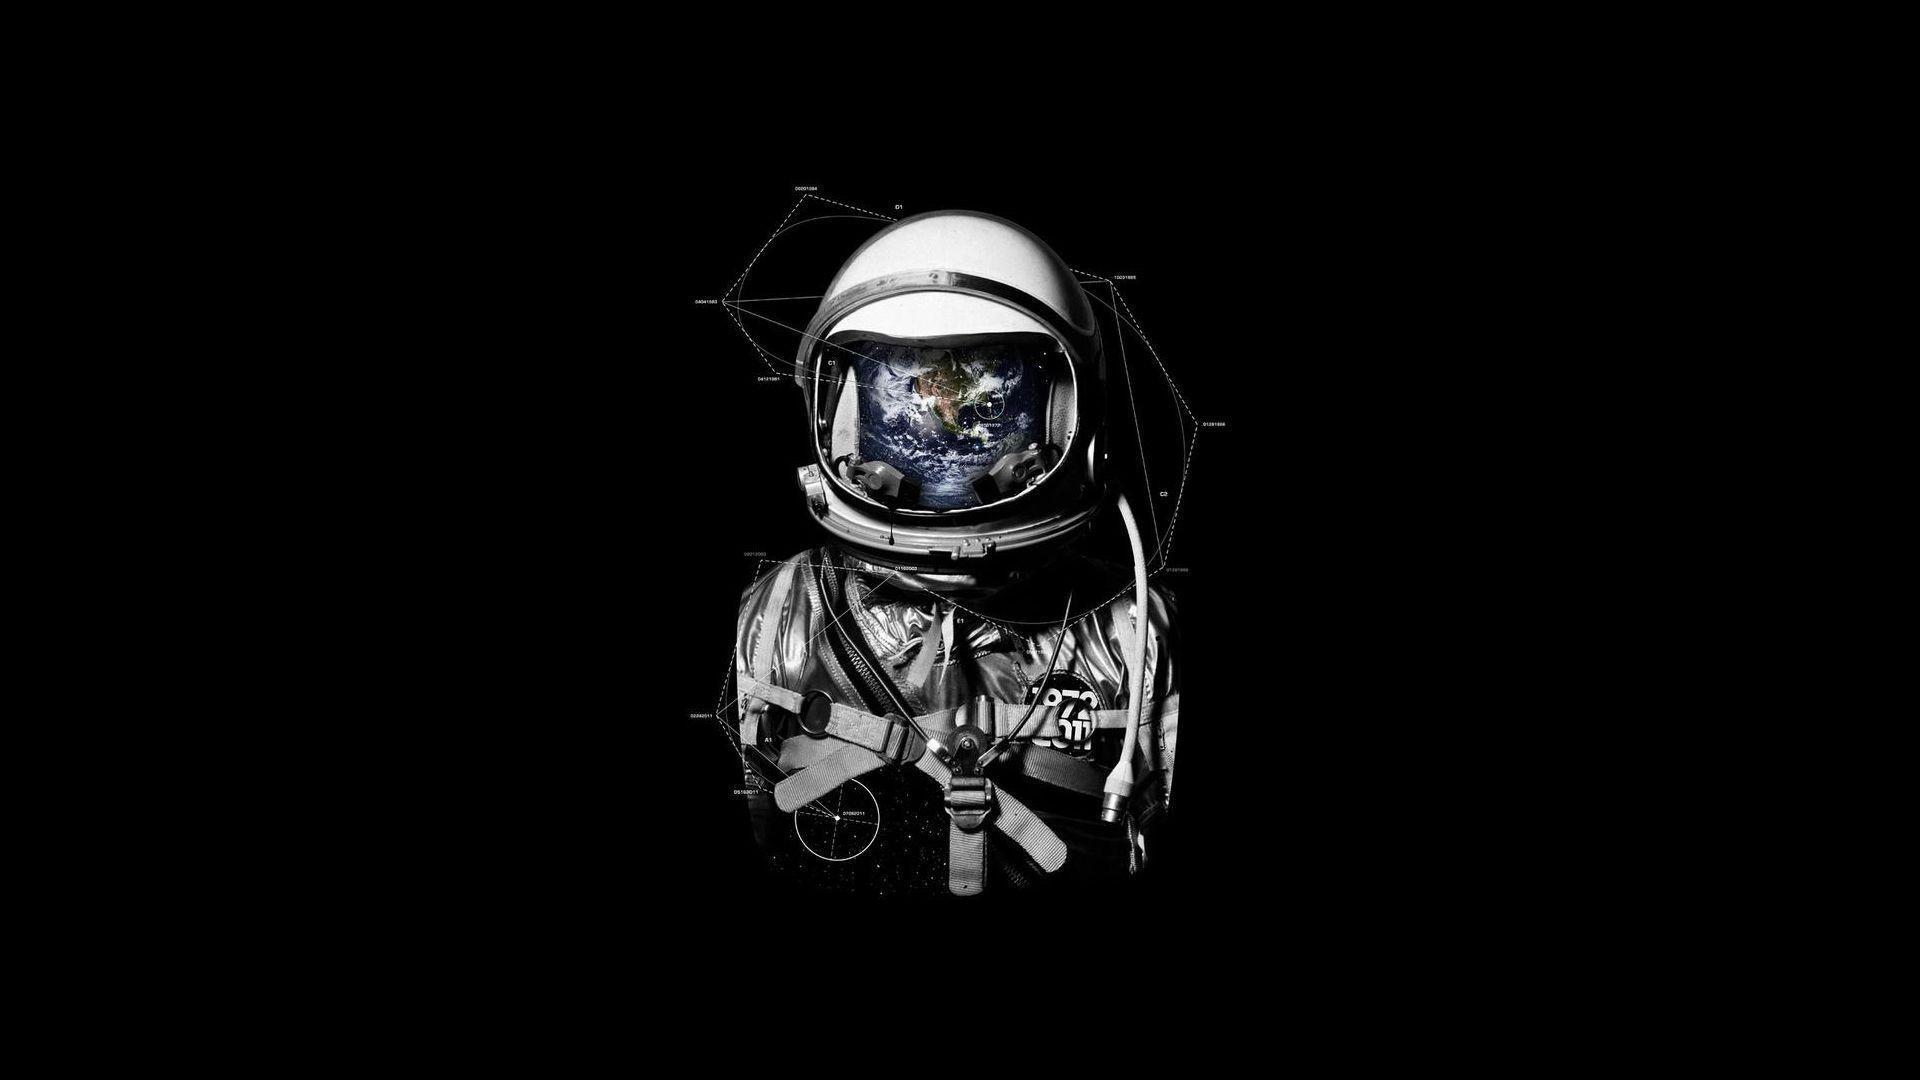 Astronaut Wallpapers For Android For Desk 4K Wallpapers x